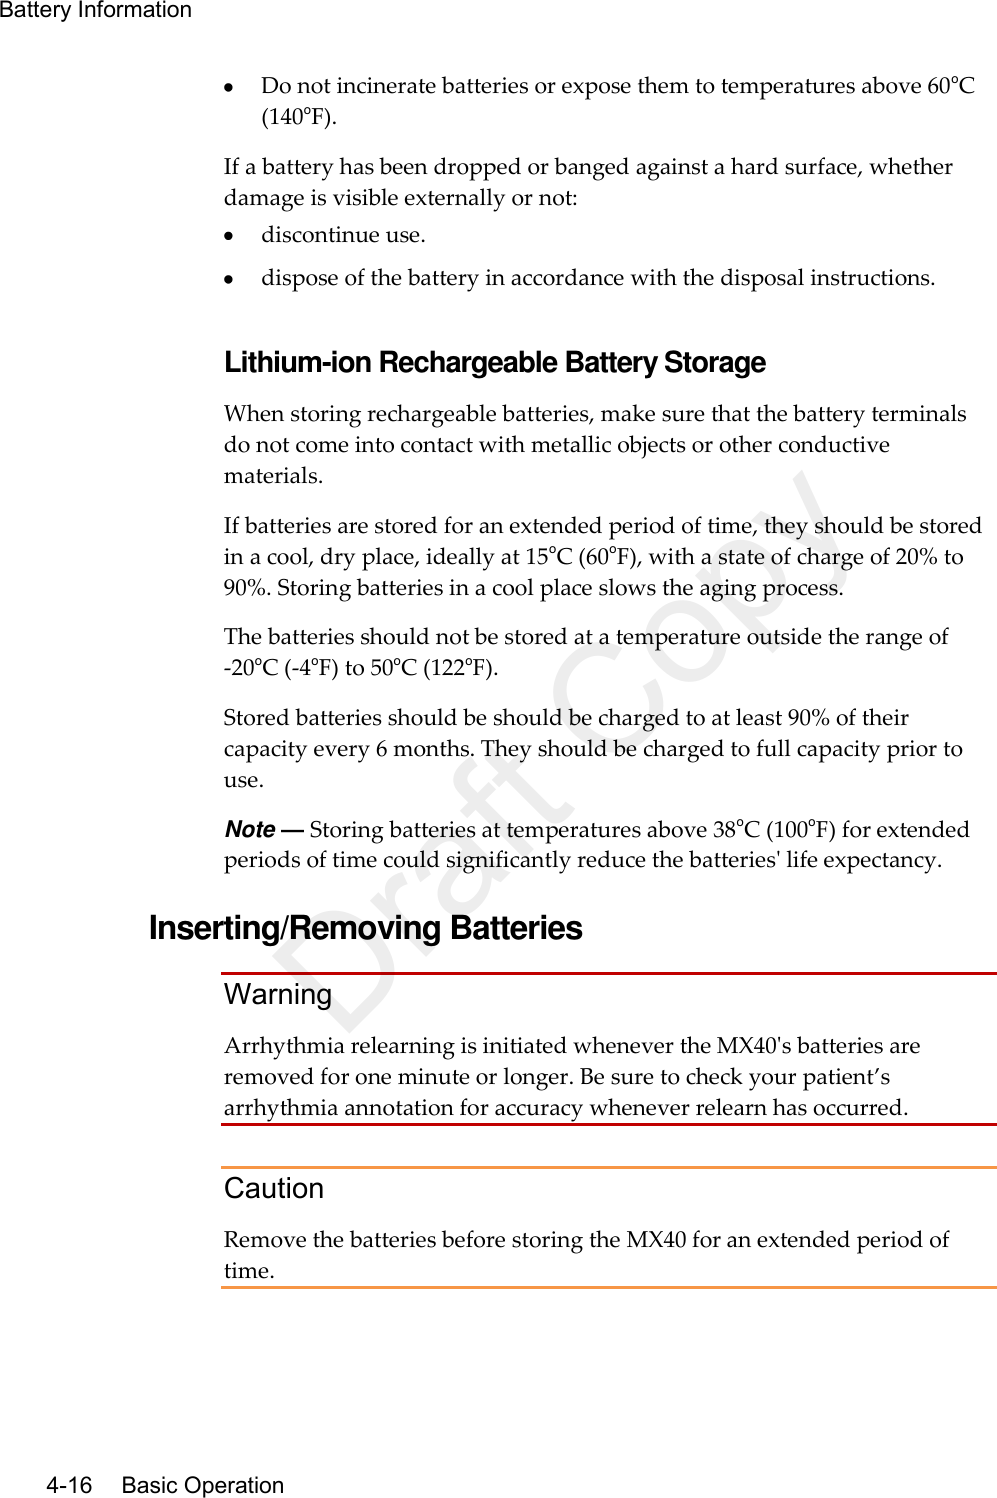 Battery Information   4-16    Basic Operation  Do not incinerate batteries or expose them to temperatures above 60oC (140oF). If a battery has been dropped or banged against a hard surface, whether damage is visible externally or not:  discontinue use.  dispose of the battery in accordance with the disposal instructions.  Lithium-ion Rechargeable Battery Storage When storing rechargeable batteries, make sure that the battery terminals do not come into contact with metallic objects or other conductive materials. If batteries are stored for an extended period of time, they should be stored in a cool, dry place, ideally at 15oC (60oF), with a state of charge of 20% to 90%. Storing batteries in a cool place slows the aging process.   The batteries should not be stored at a temperature outside the range of -20oC (-4oF) to 50oC (122oF). Stored batteries should be should be charged to at least 90% of their capacity every 6 months. They should be charged to full capacity prior to use. Note — Storing batteries at temperatures above 38oC (100oF) for extended periods of time could significantly reduce the batteries&apos; life expectancy.  Inserting/Removing Batteries Warning Arrhythmia relearning is initiated whenever the MX40&apos;s batteries are removed for one minute or longer. Be sure to check your patient’s arrhythmia annotation for accuracy whenever relearn has occurred.  Caution Remove the batteries before storing the MX40 for an extended period of time.  Draft Copy